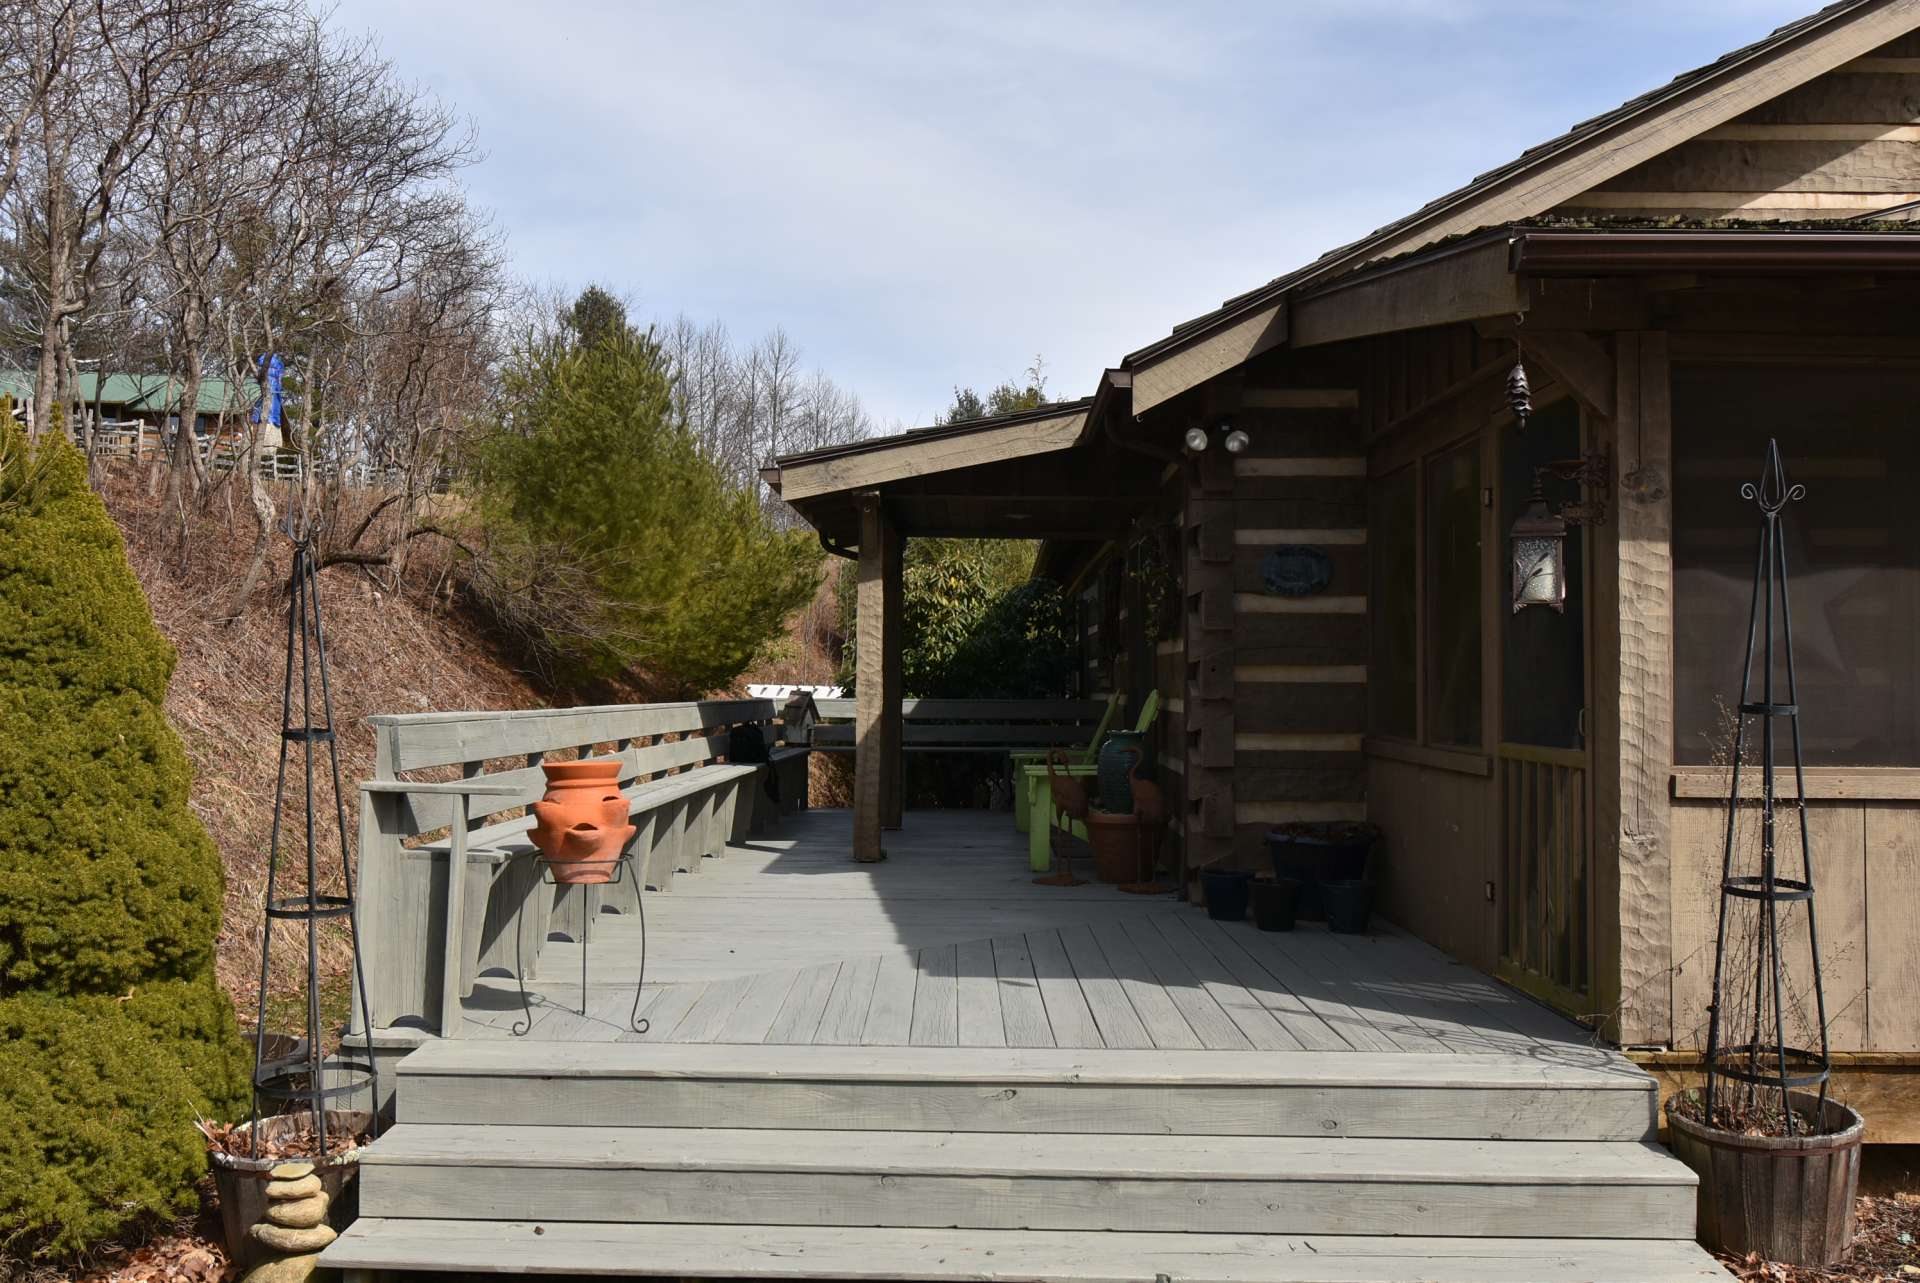 The screened porch opens to an open deck area expanding the living space during the warmer months.